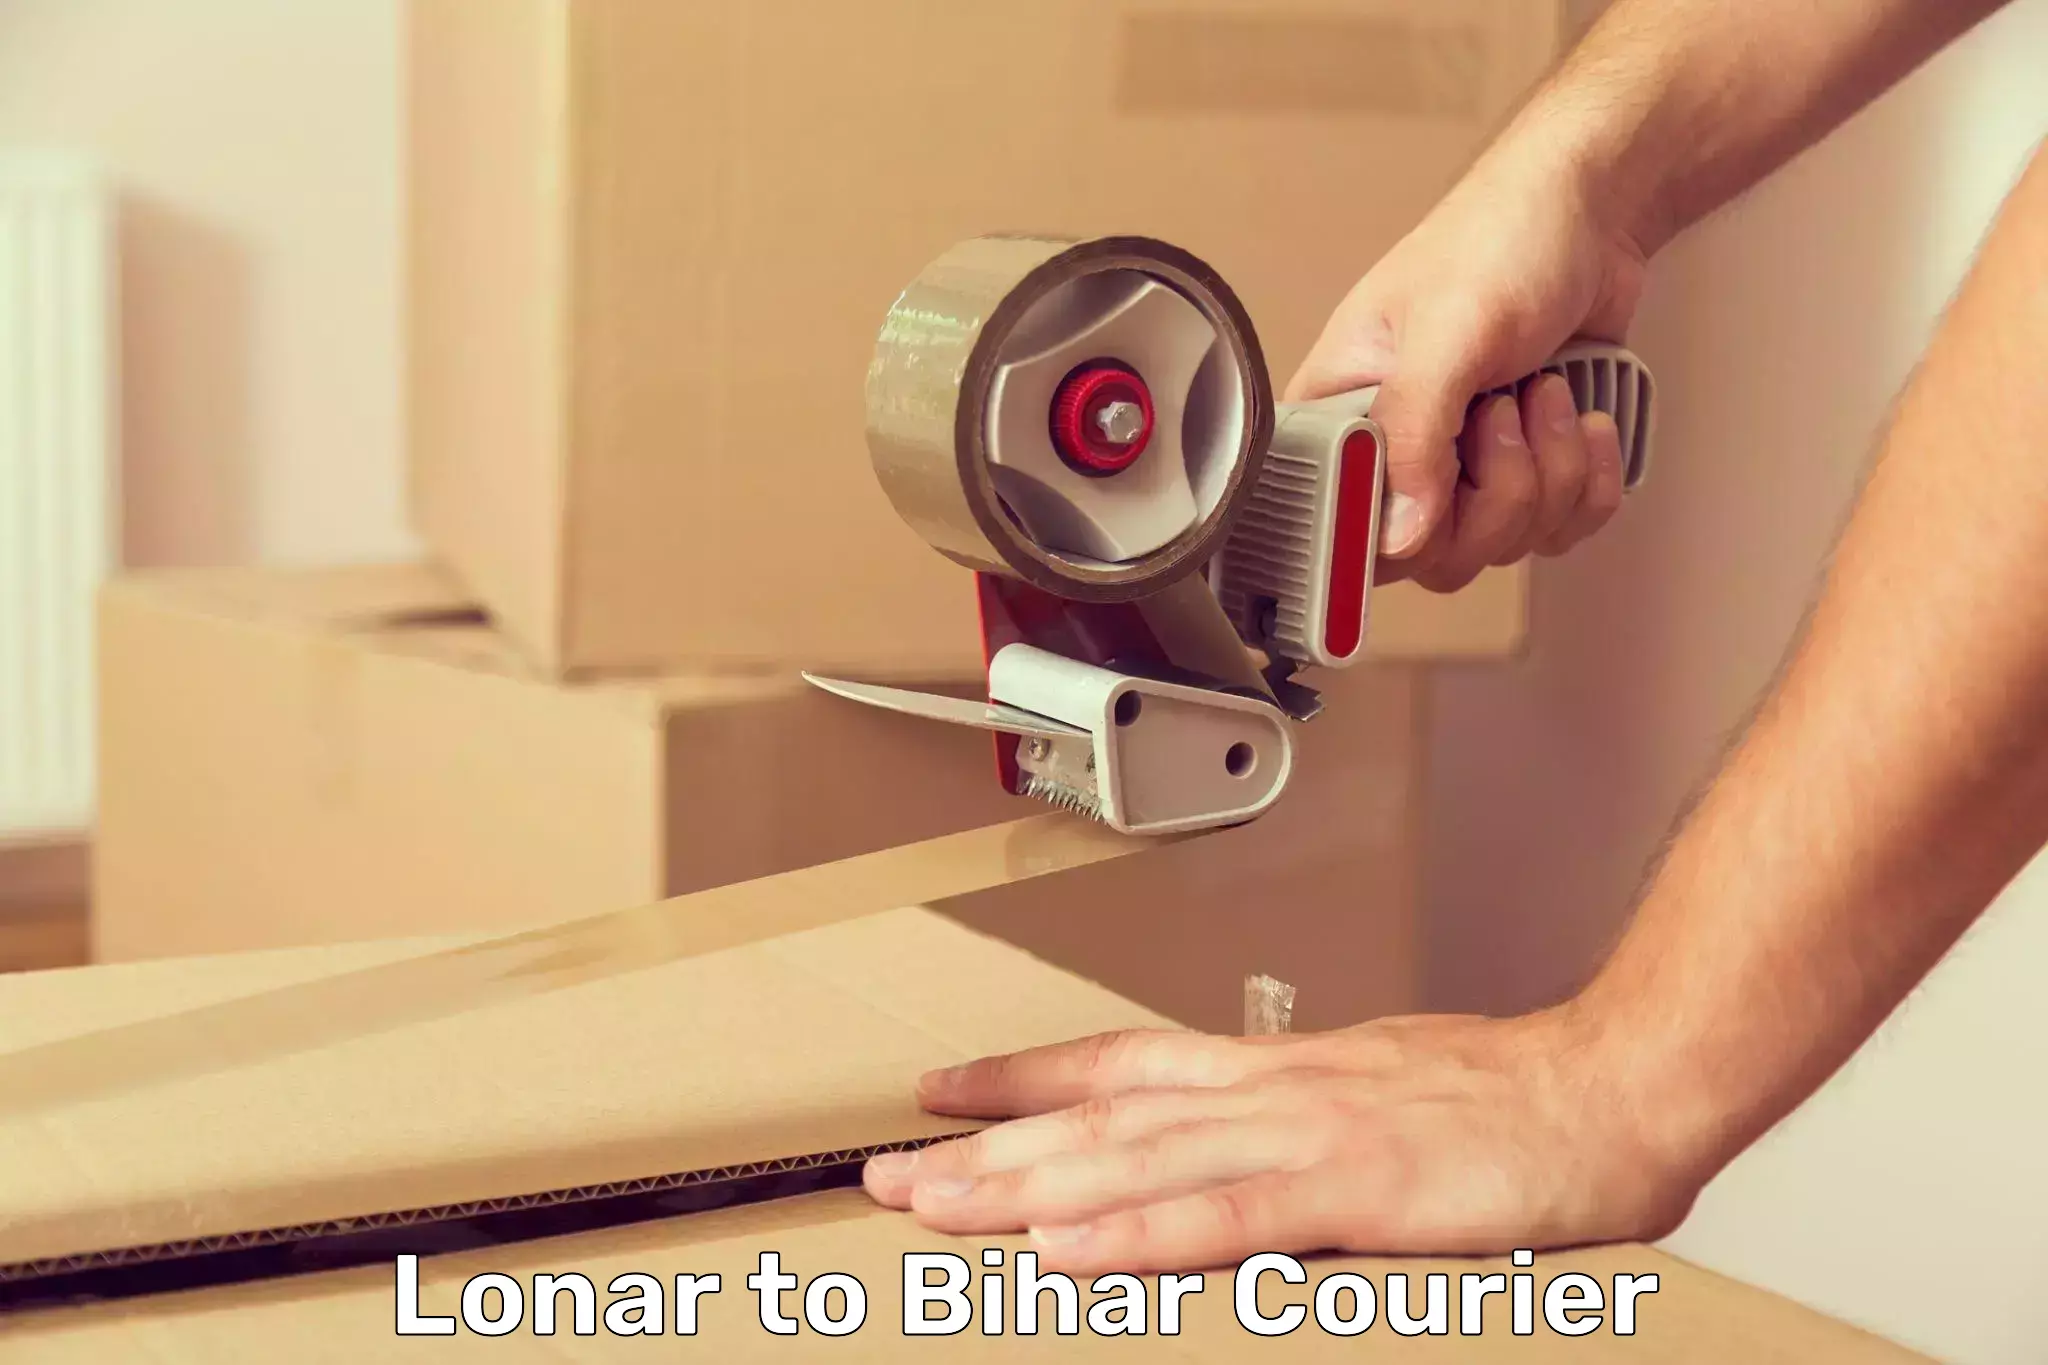 Personalized courier experiences Lonar to Jagdishpur Bhojpur